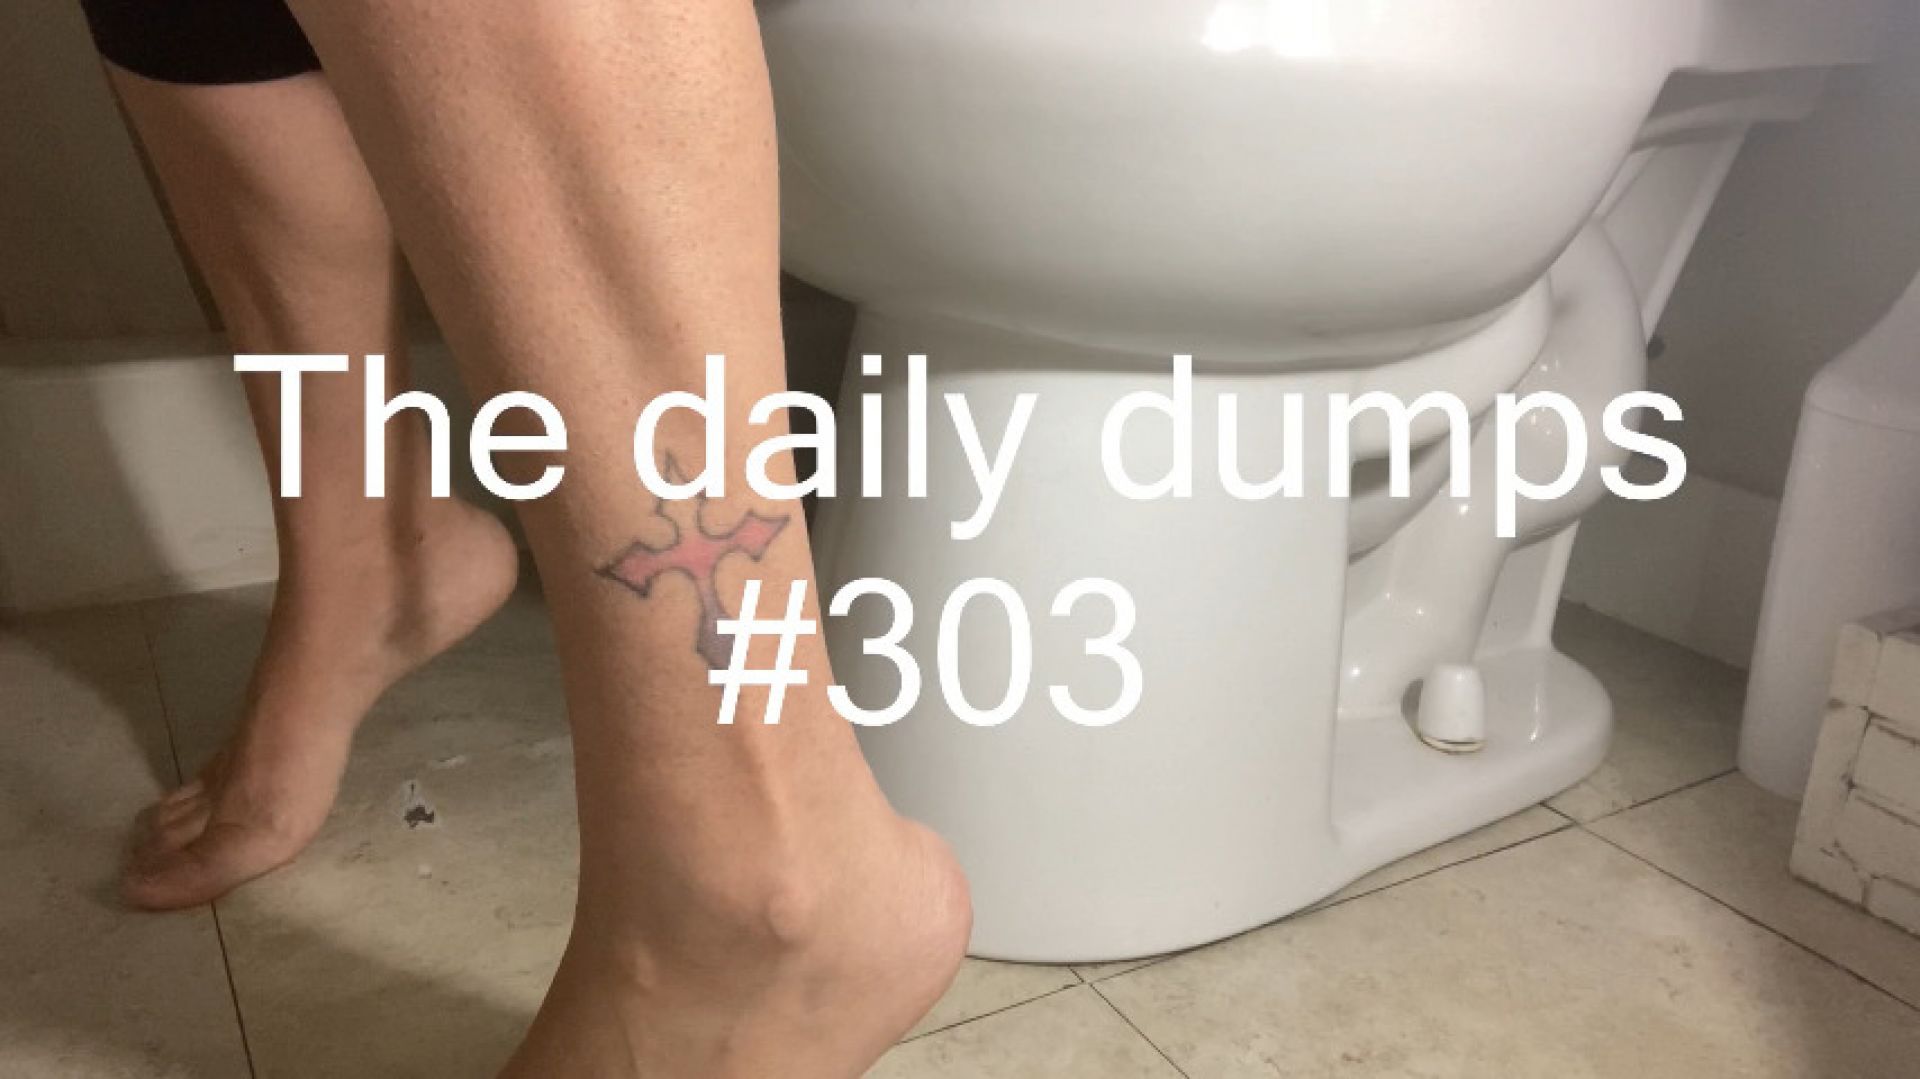 The daily dumps #303